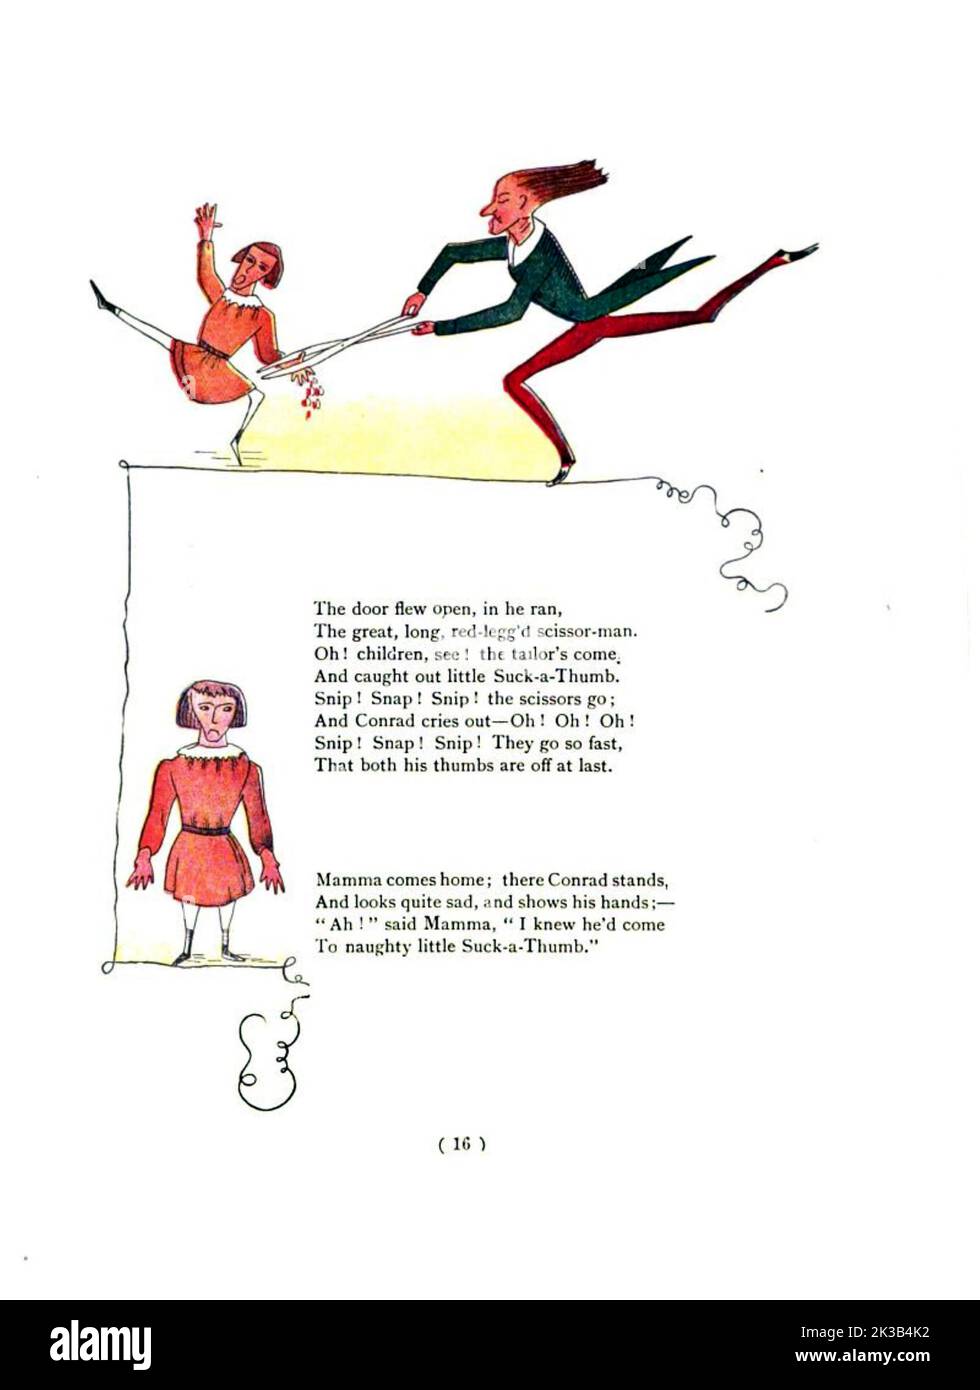 The Story of Little Suck-a-Thumb from ' The Struwwelpeter painting book ' Pretty Stories and Funny Pictures for Little Children by Heinrich Hoffmann Published in London in 1900 Stock Photo